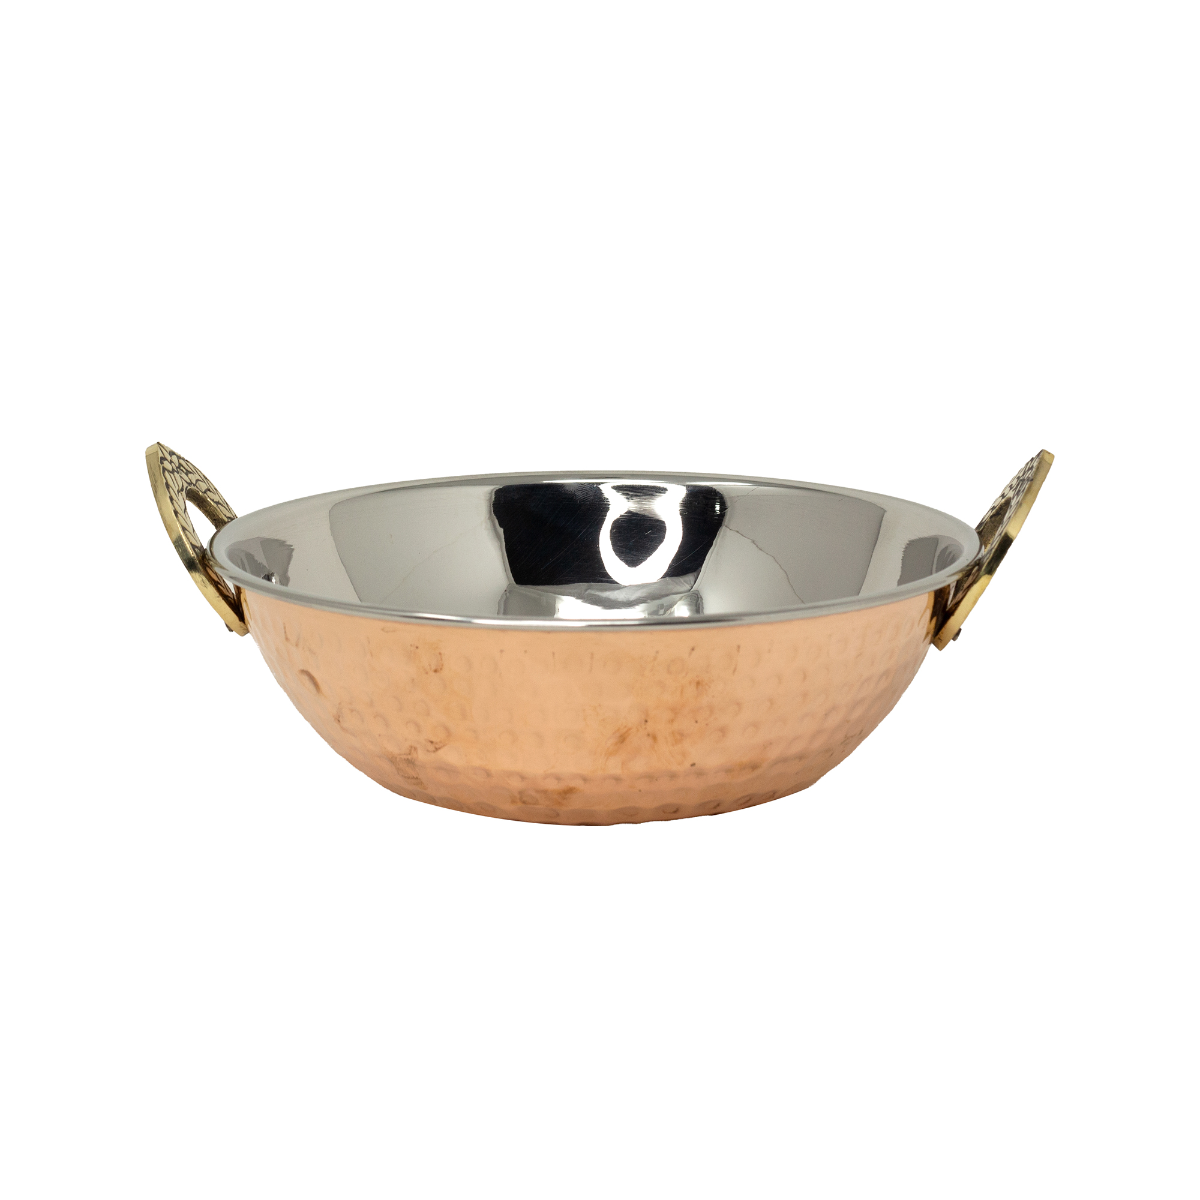 ROCK TAWA COPPER HAMMERED KADHAI WITH STAINLESS STEEL MEDIUM 6" INCHES